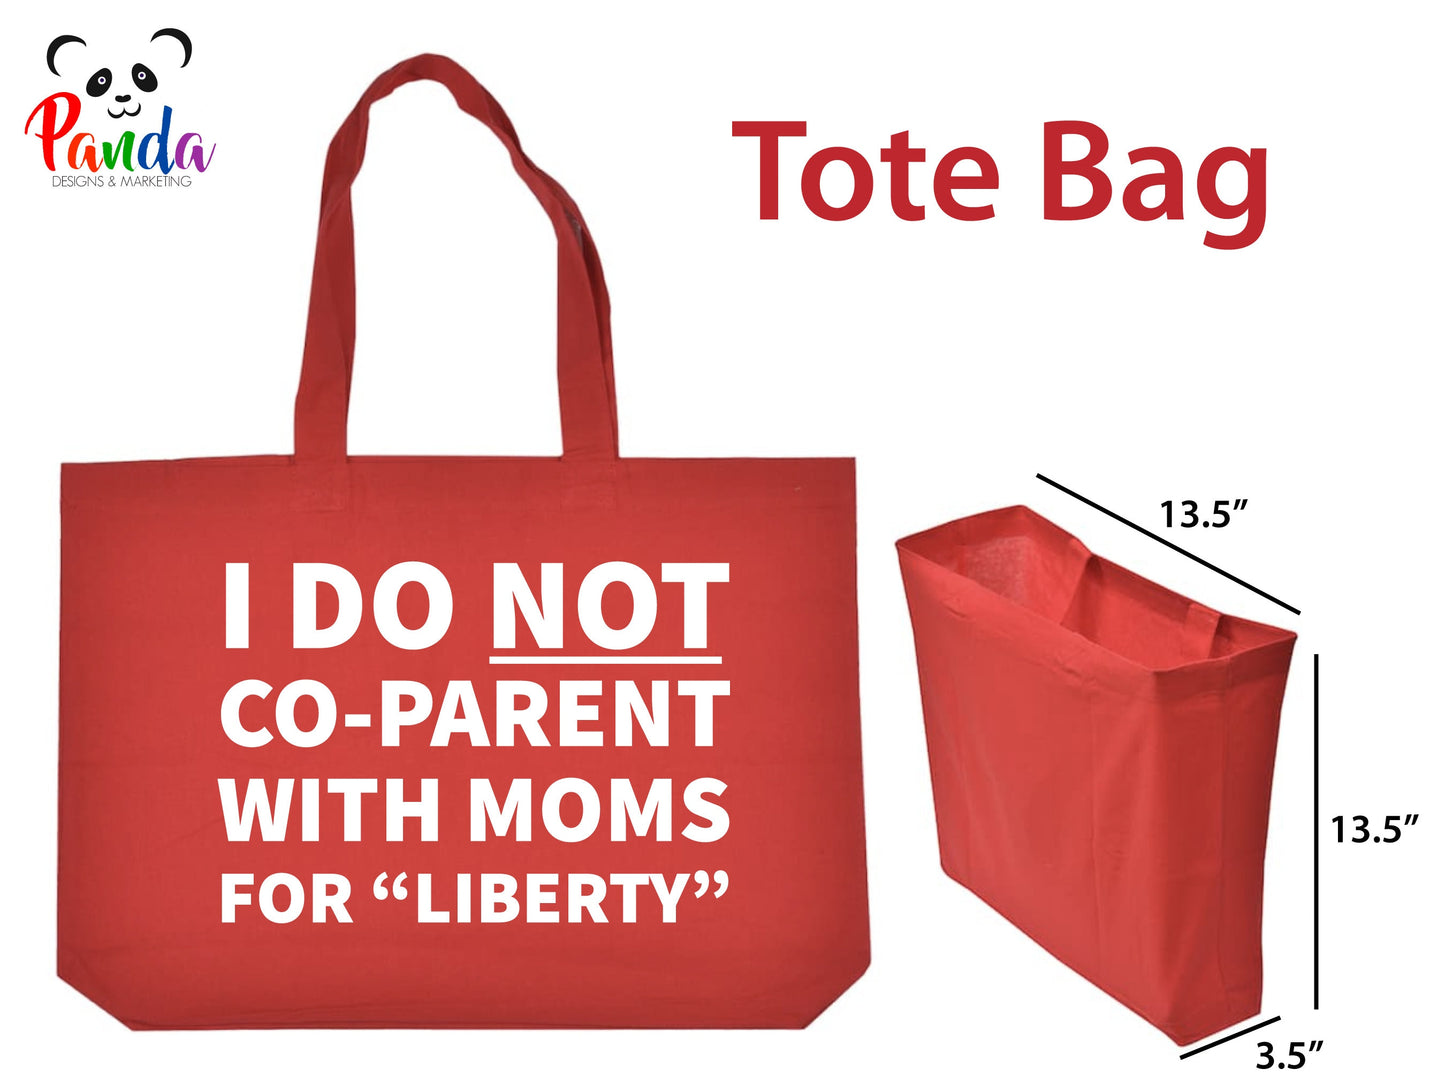 I do NOT co-parent with Moms for Liberty Tote Bag.